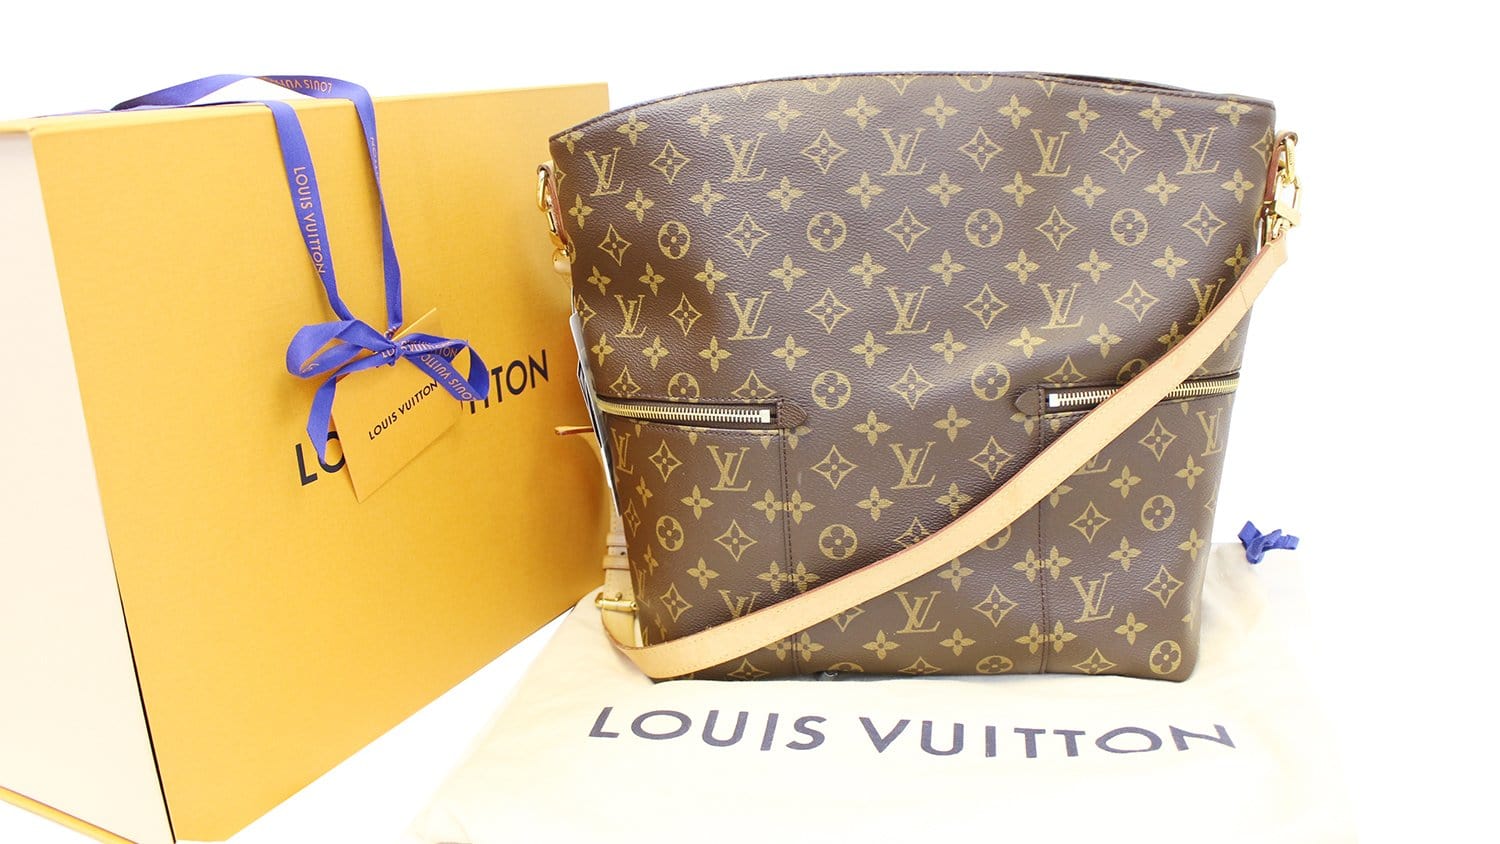 Louis Vuitton Yellow Gift Wrapping Supplies